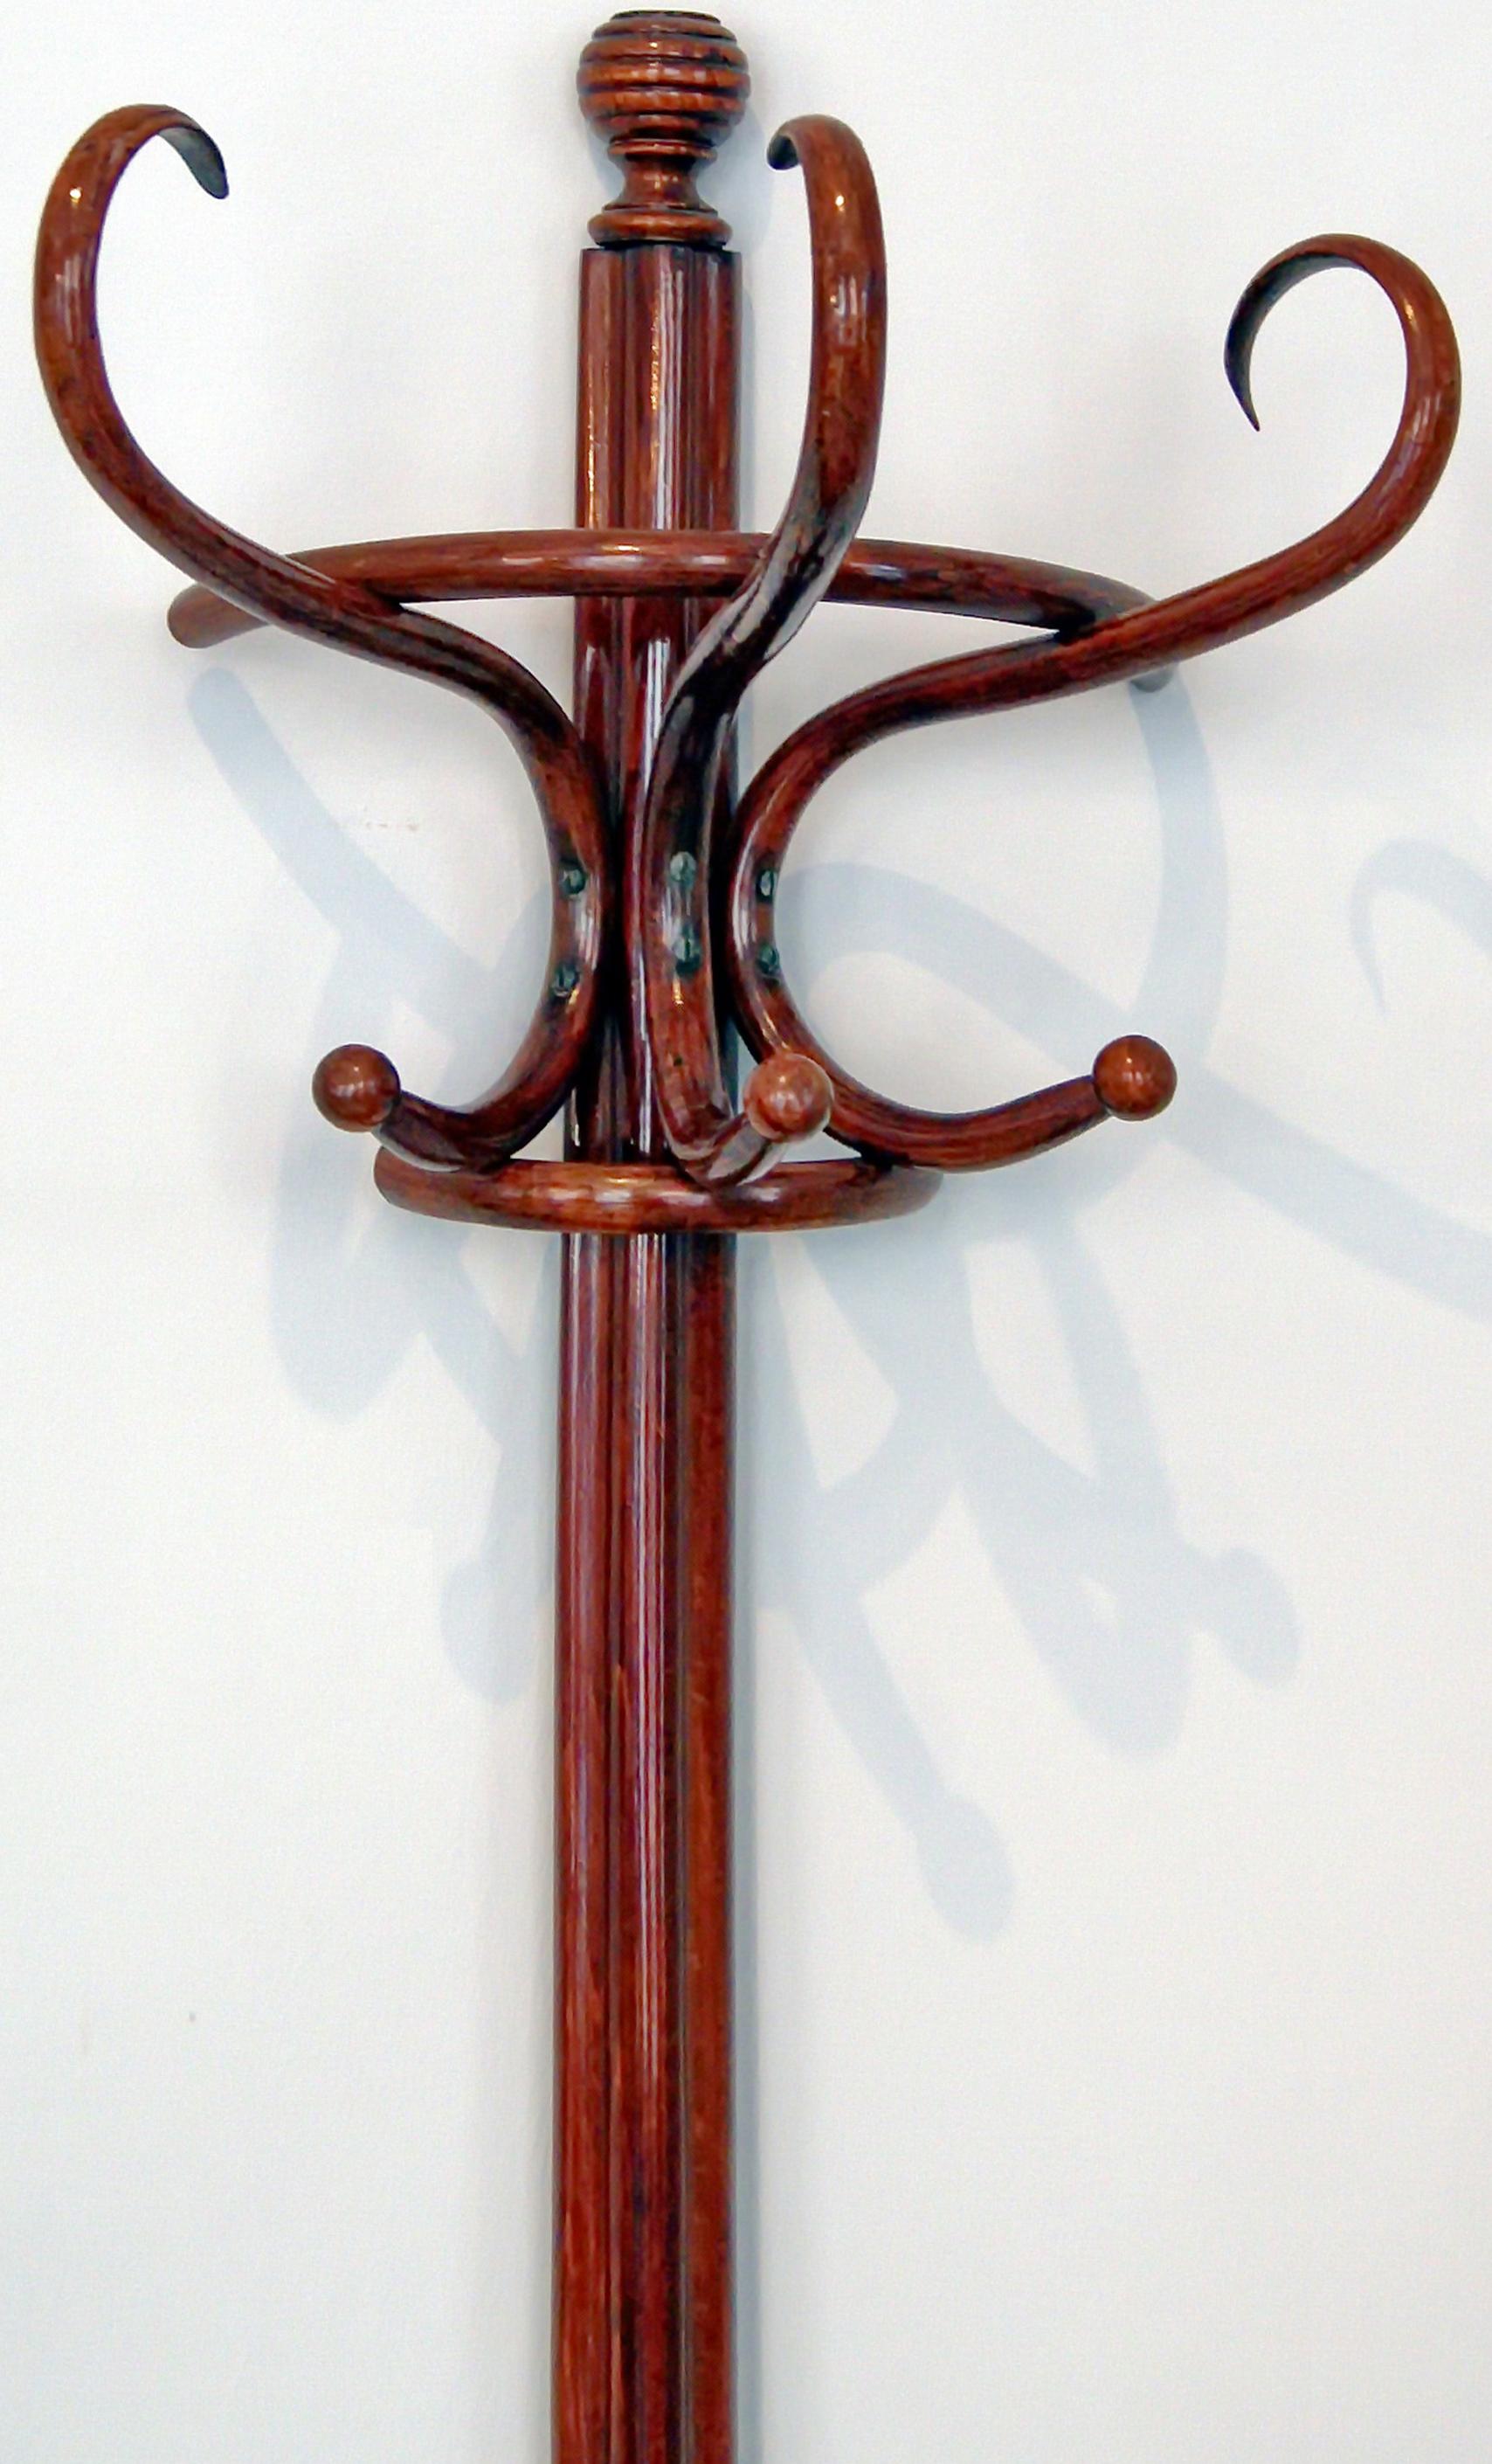 THONET COAT-TREE / COAT RACK FOR PLACEMENT AT WALL, MODEL NUMBER  10601  
(authenticity guaranteed !)

beech wood  /  bright mahogany stained  /  refurbished by hand  /  the wood is amazingly bent in most finest Thonet manner !  This Thonet coat